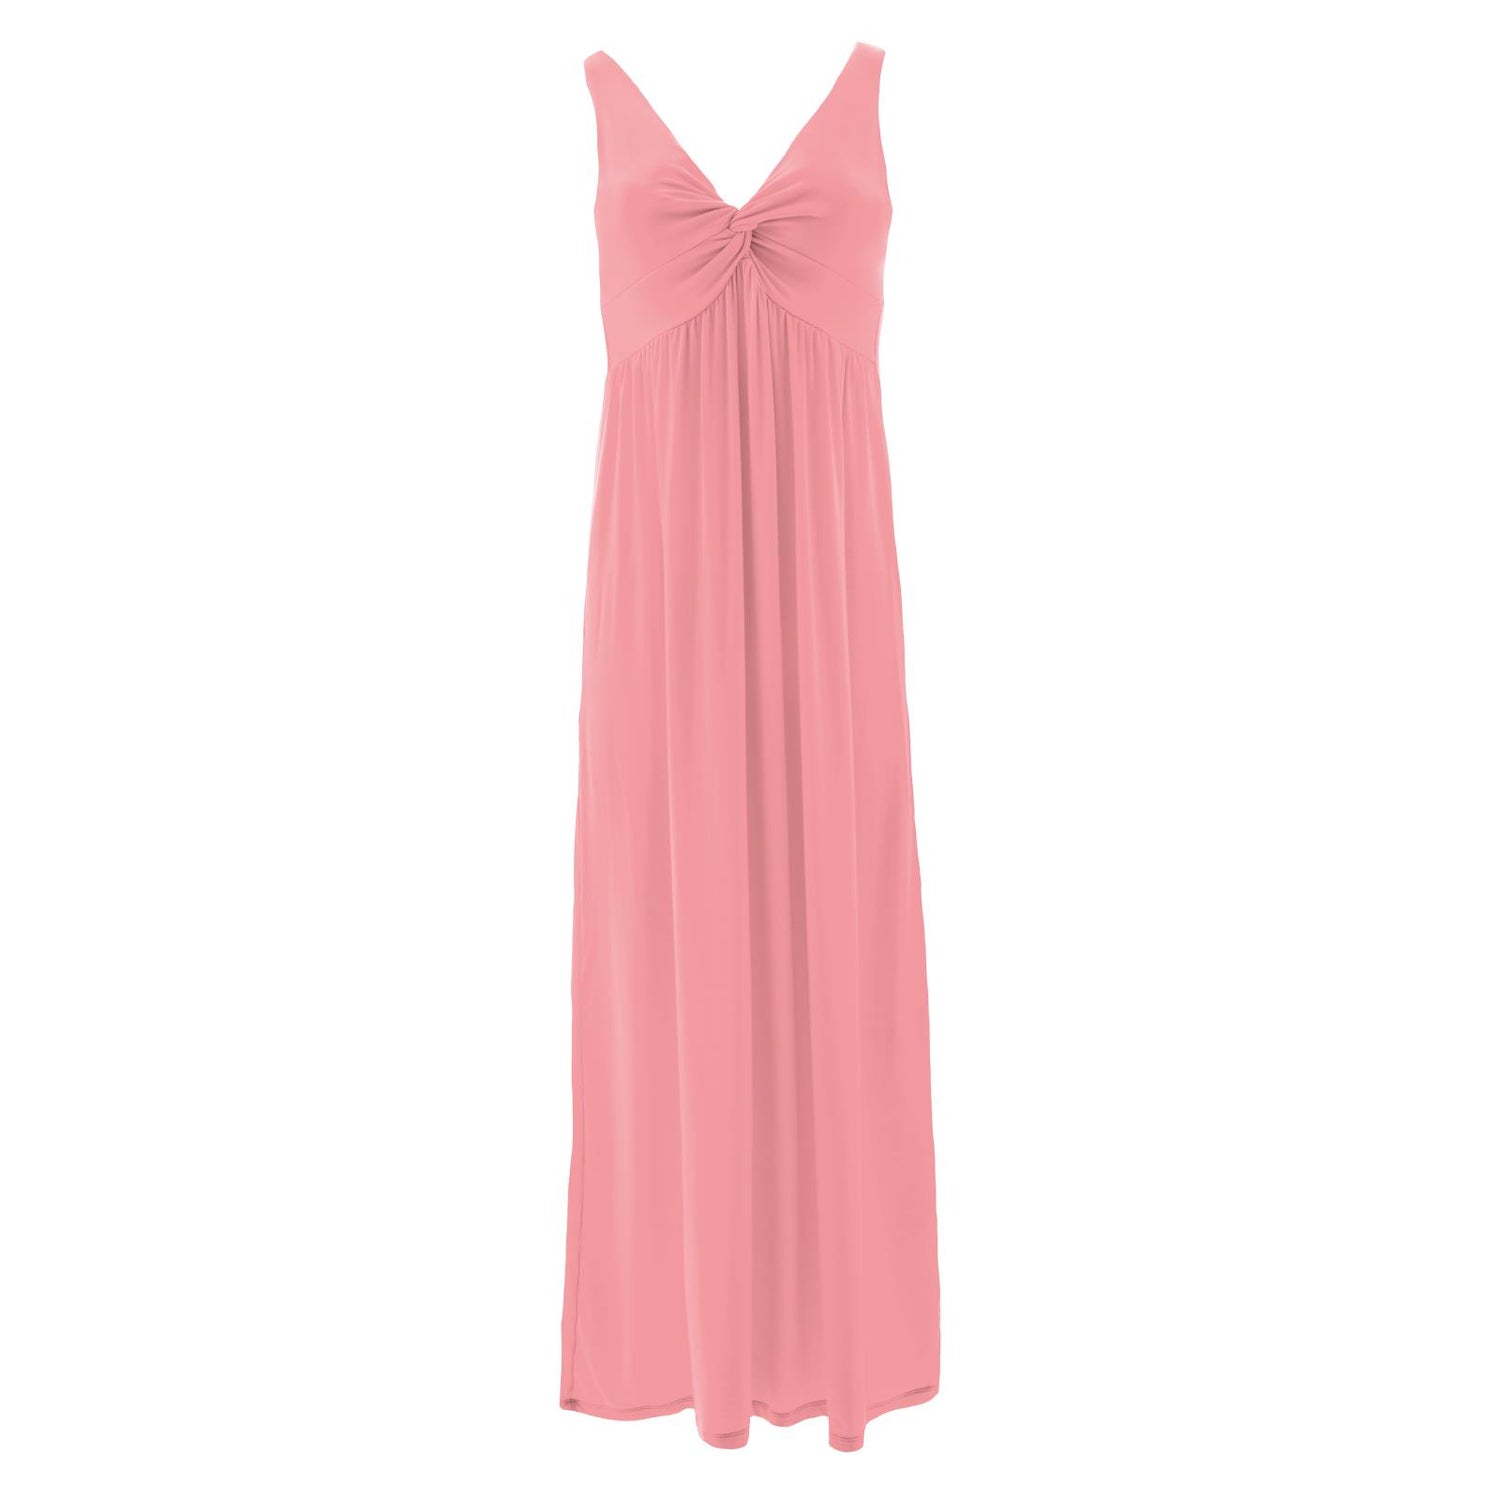 Women's Solid Simple Twist Nightgown in Strawberry